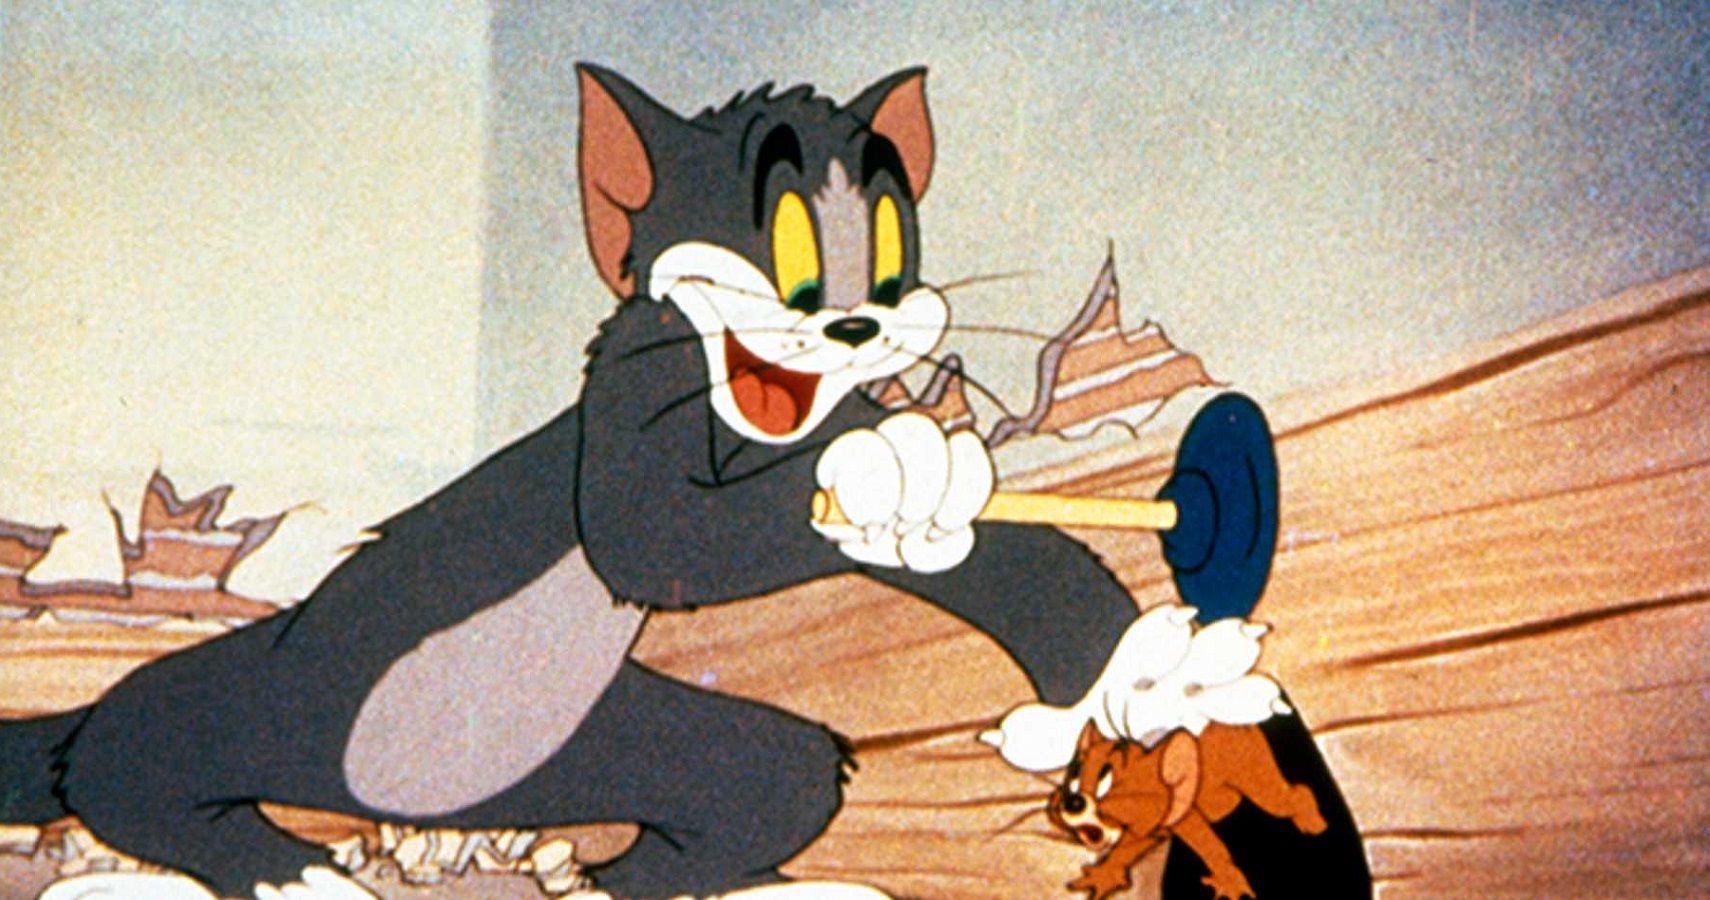 The 5 Best Tom & Jerry Films (& The 5 Worst) According To IMDb